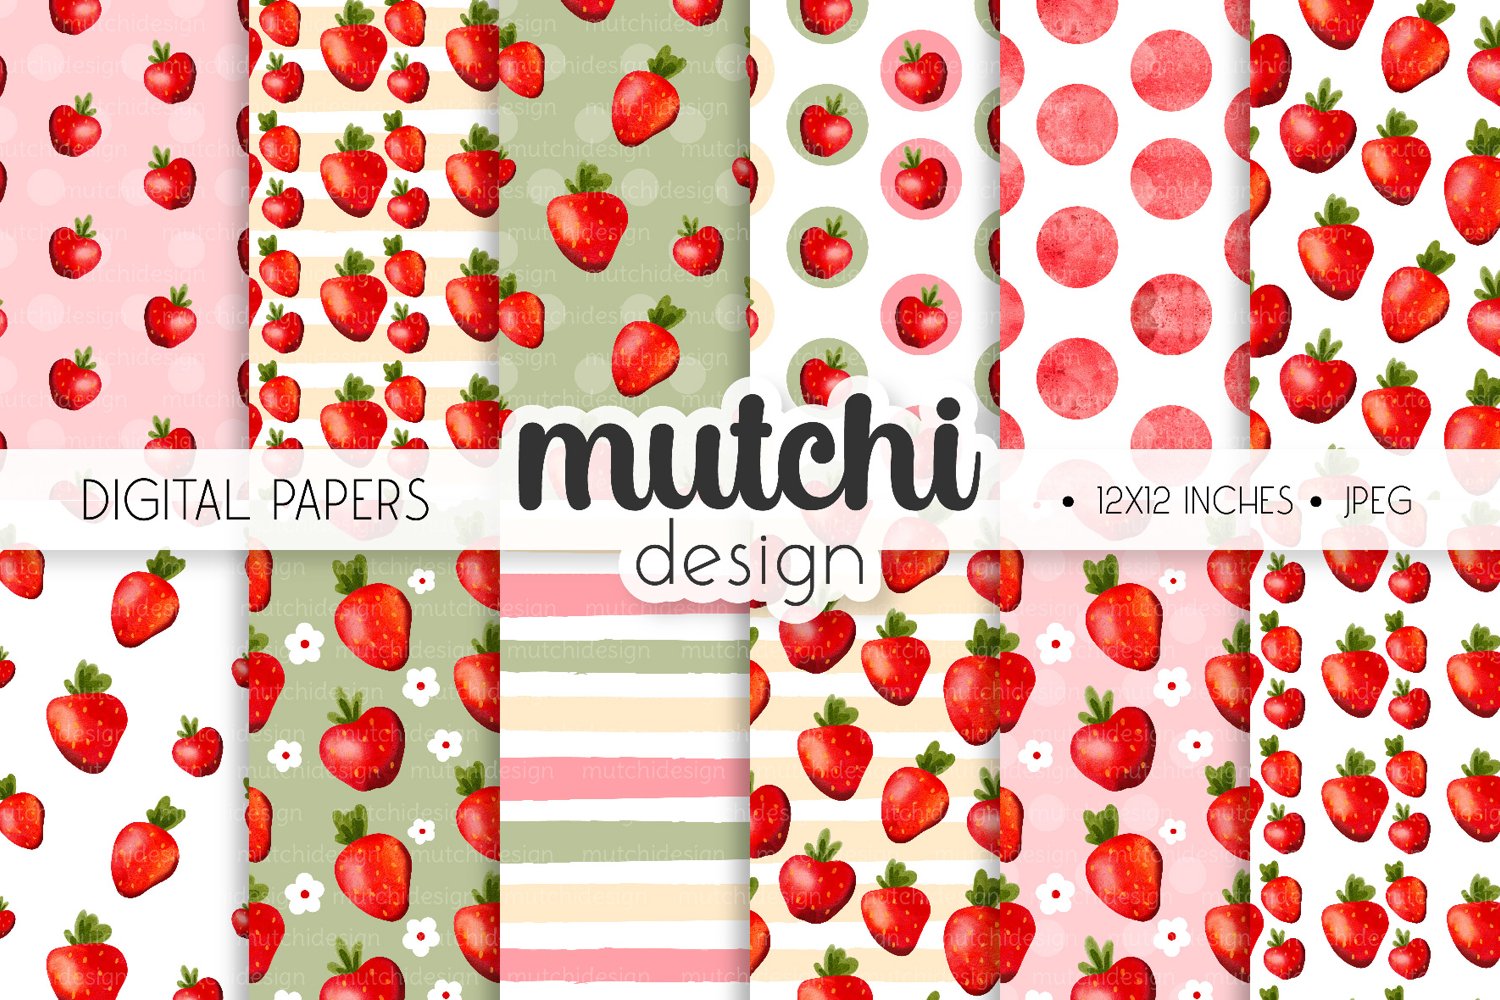 Cover image of Watercolor Strawberry Digital Papers.